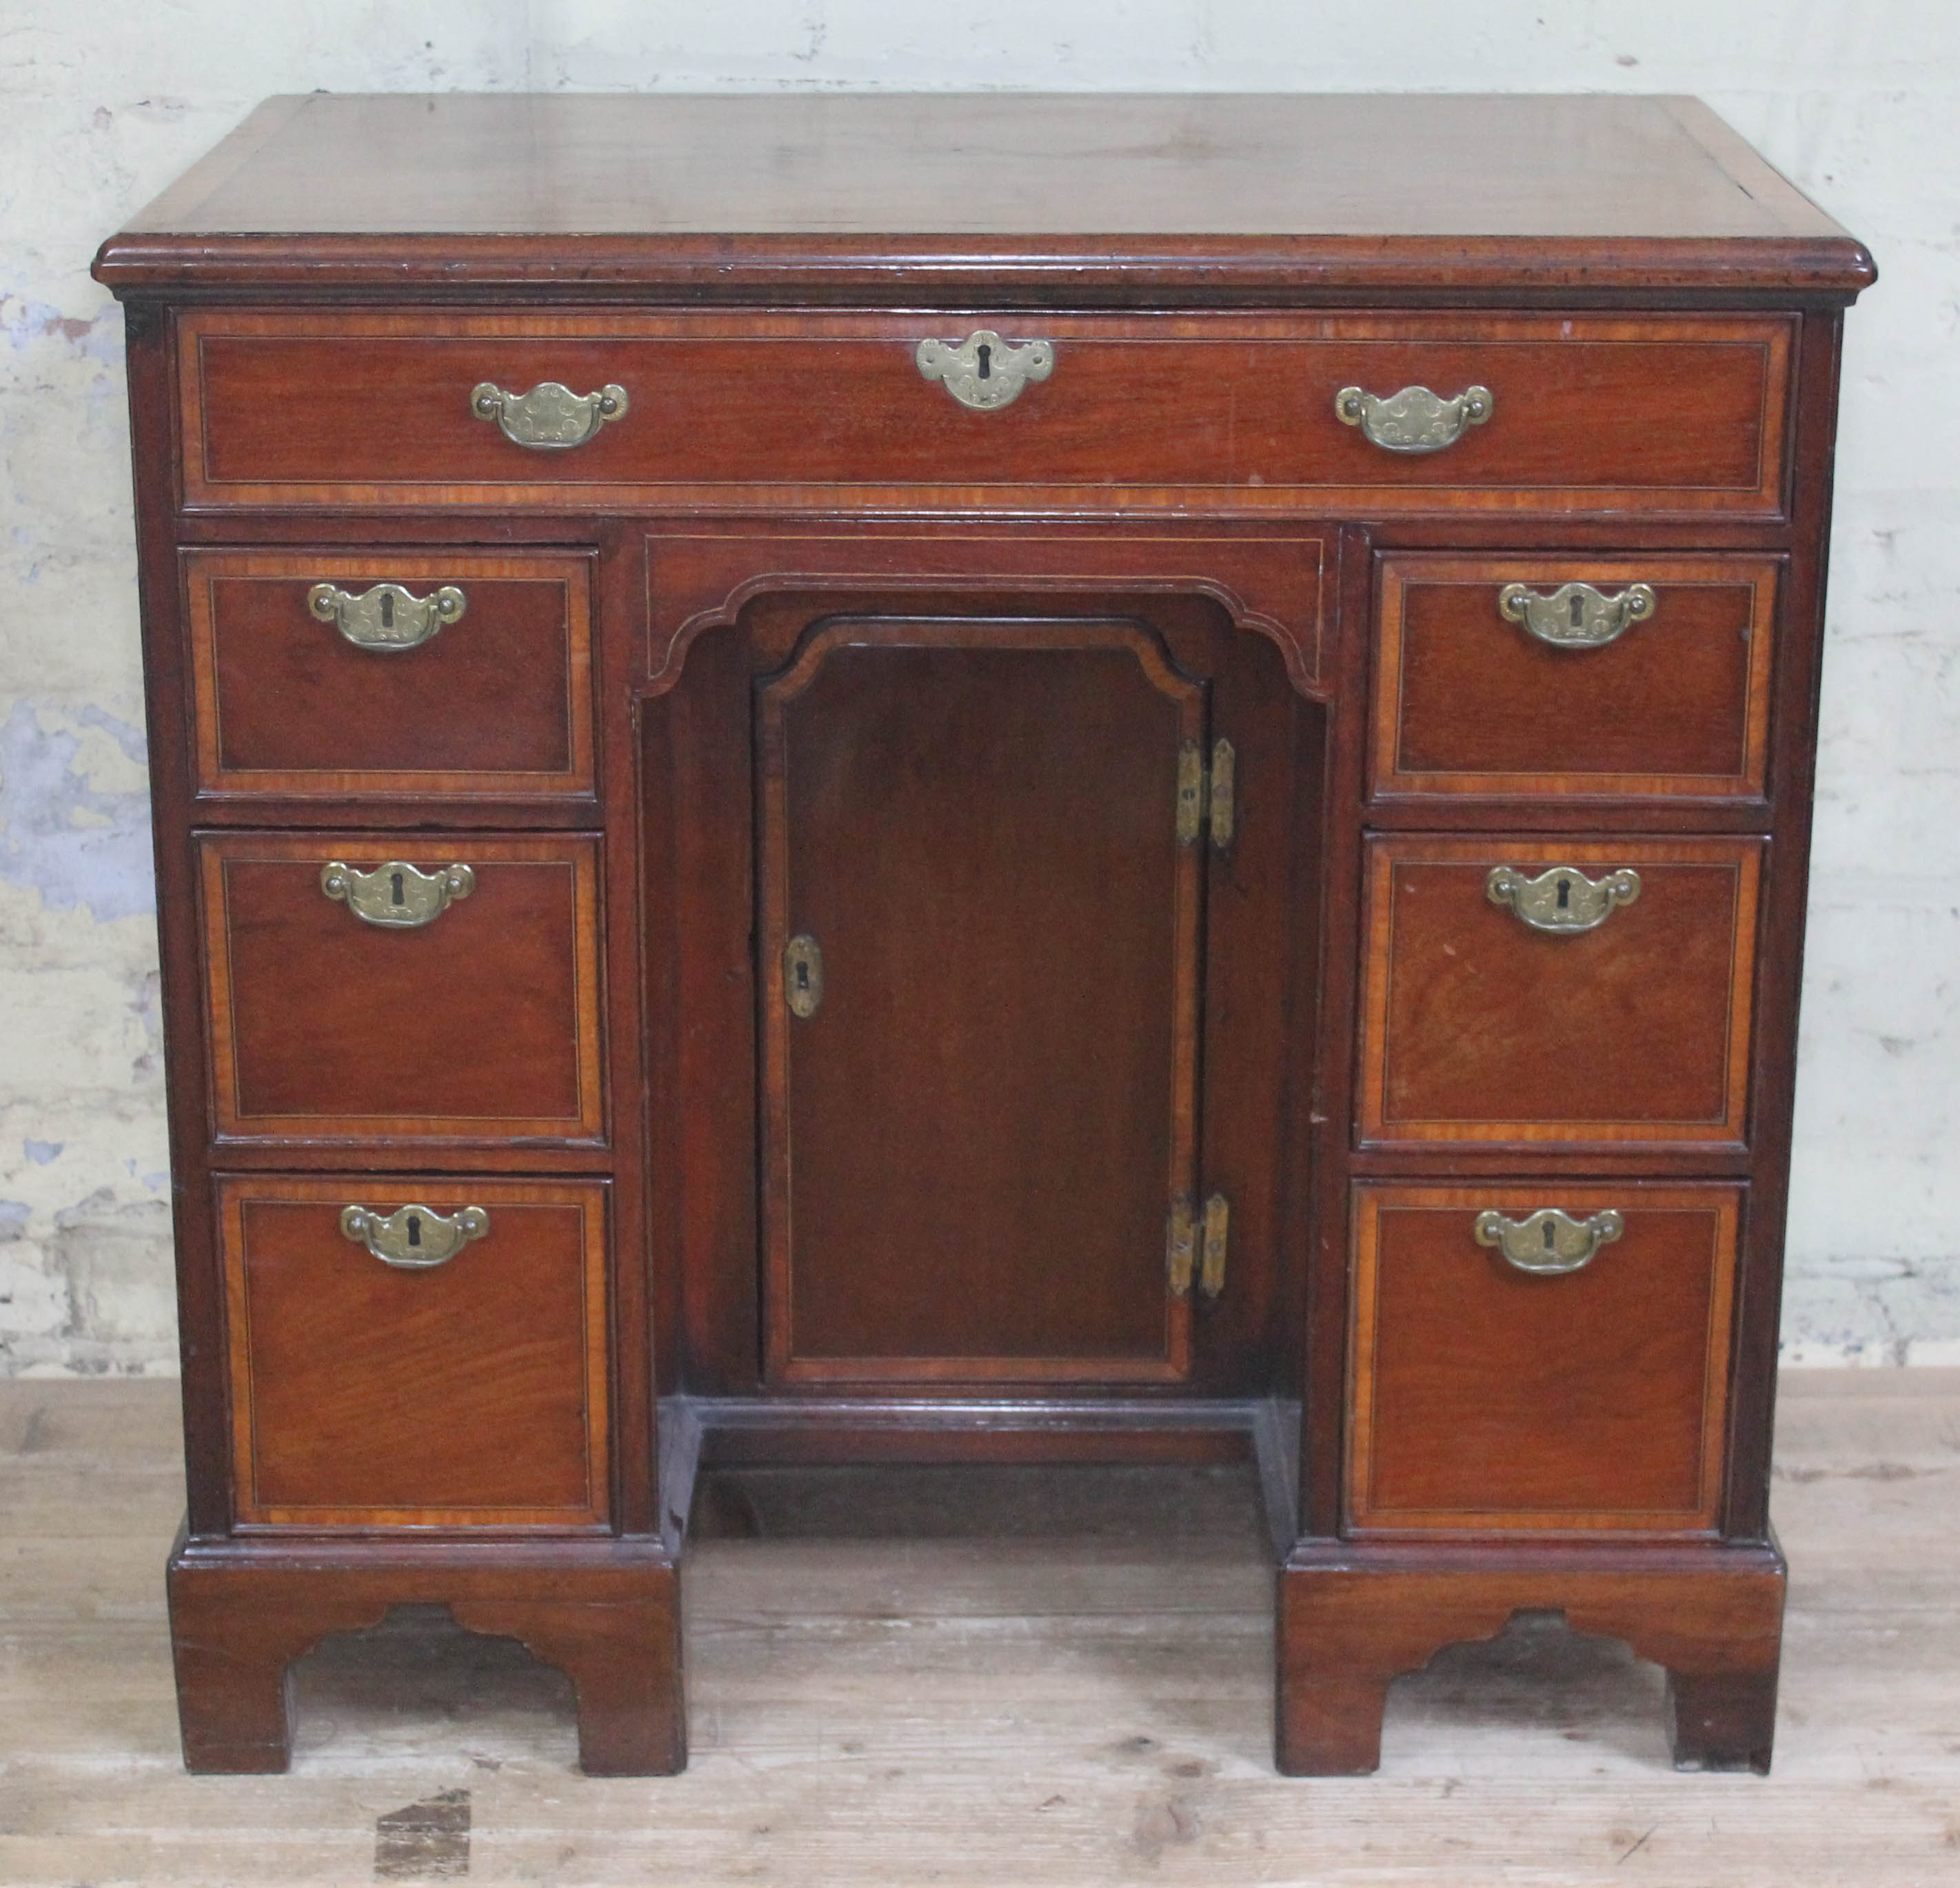 A George III mahogany knee hole desk, cross-banded top with moulded edge above one long and six